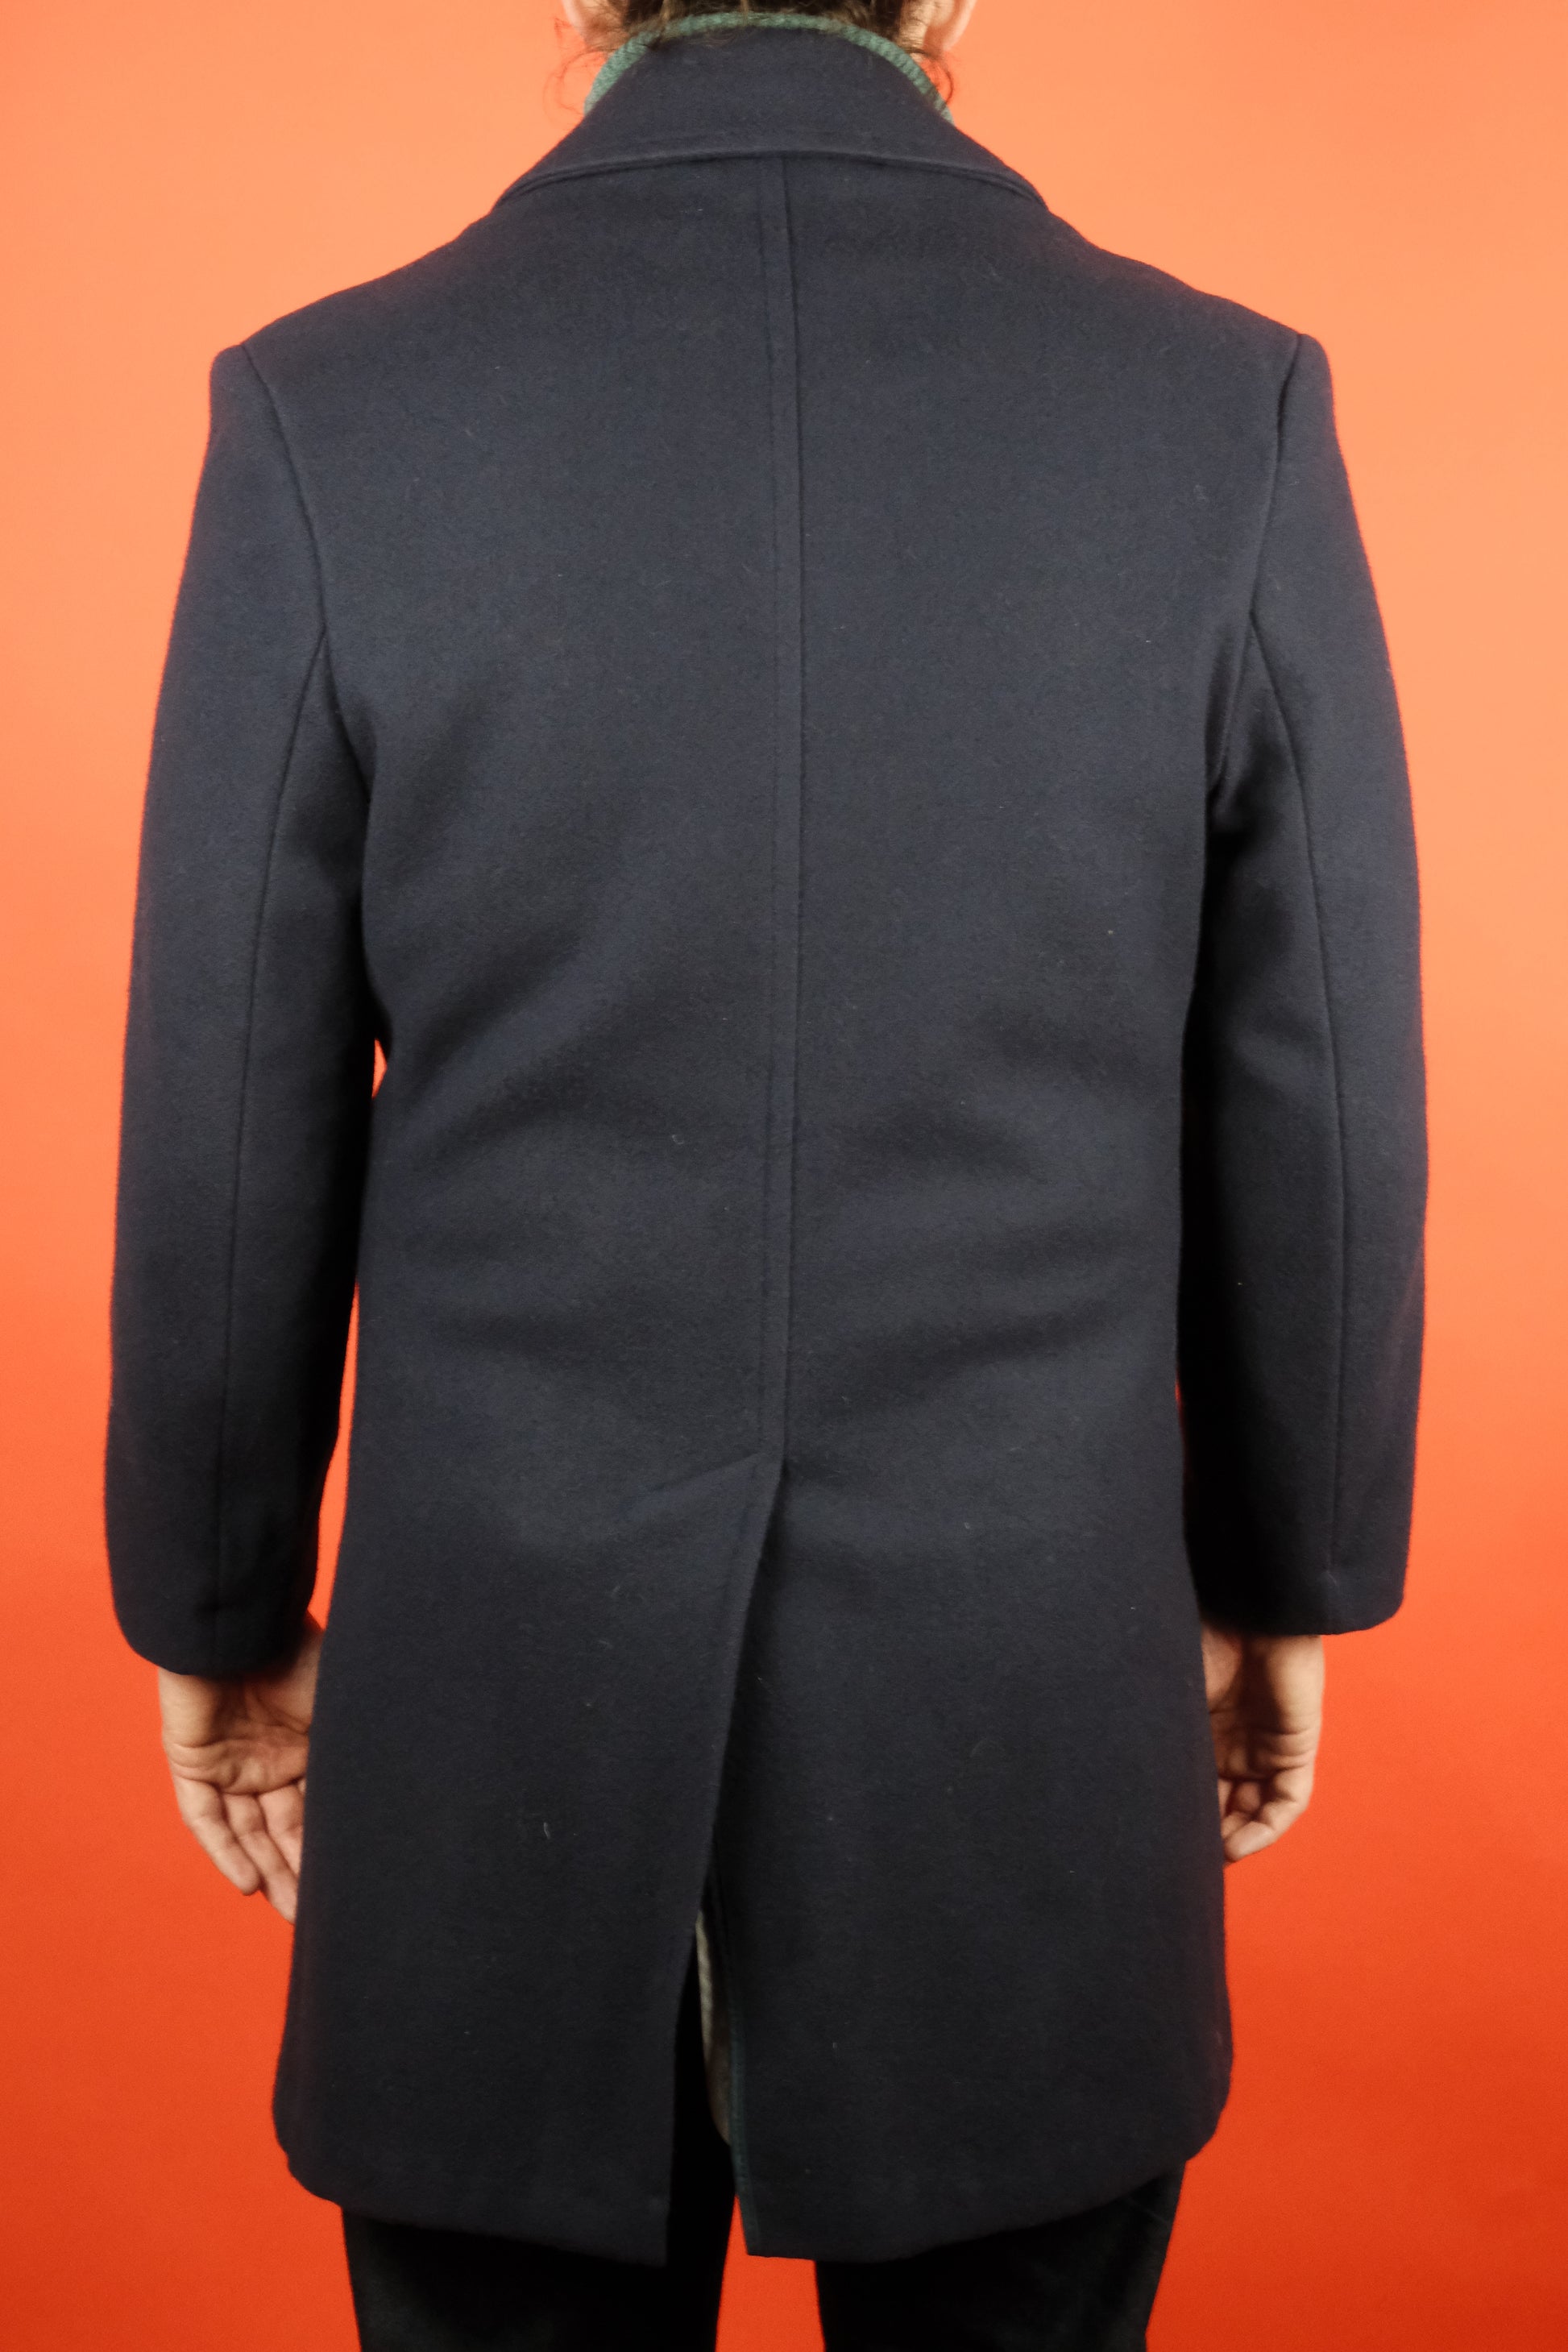 Woolrich Navy Pea Coat Made in USA 'S-M/38' - vintage clothing clochard92.com